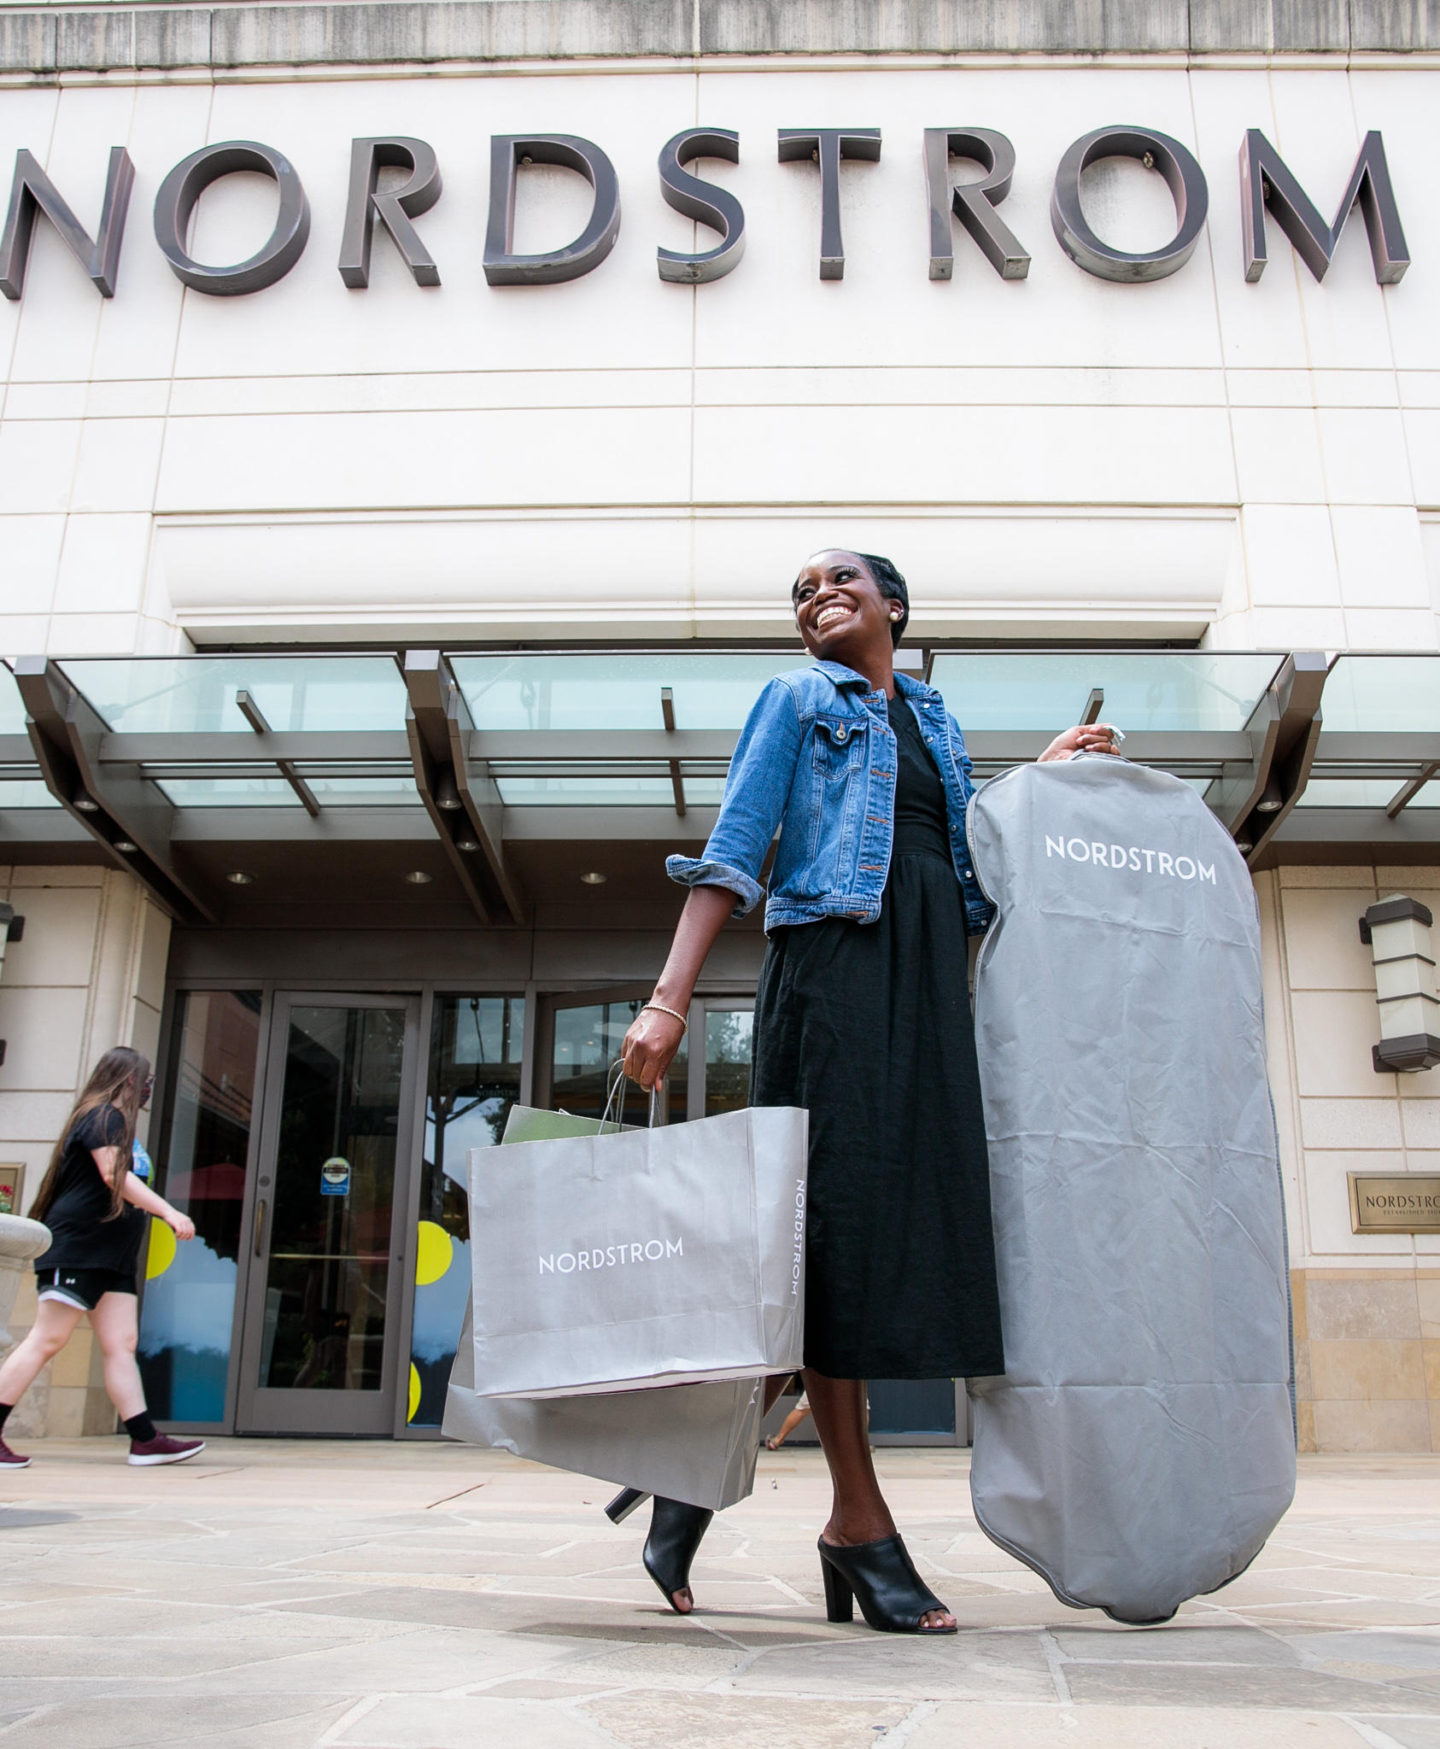 My Personal Experience Using The Styling Services At Nordstrom